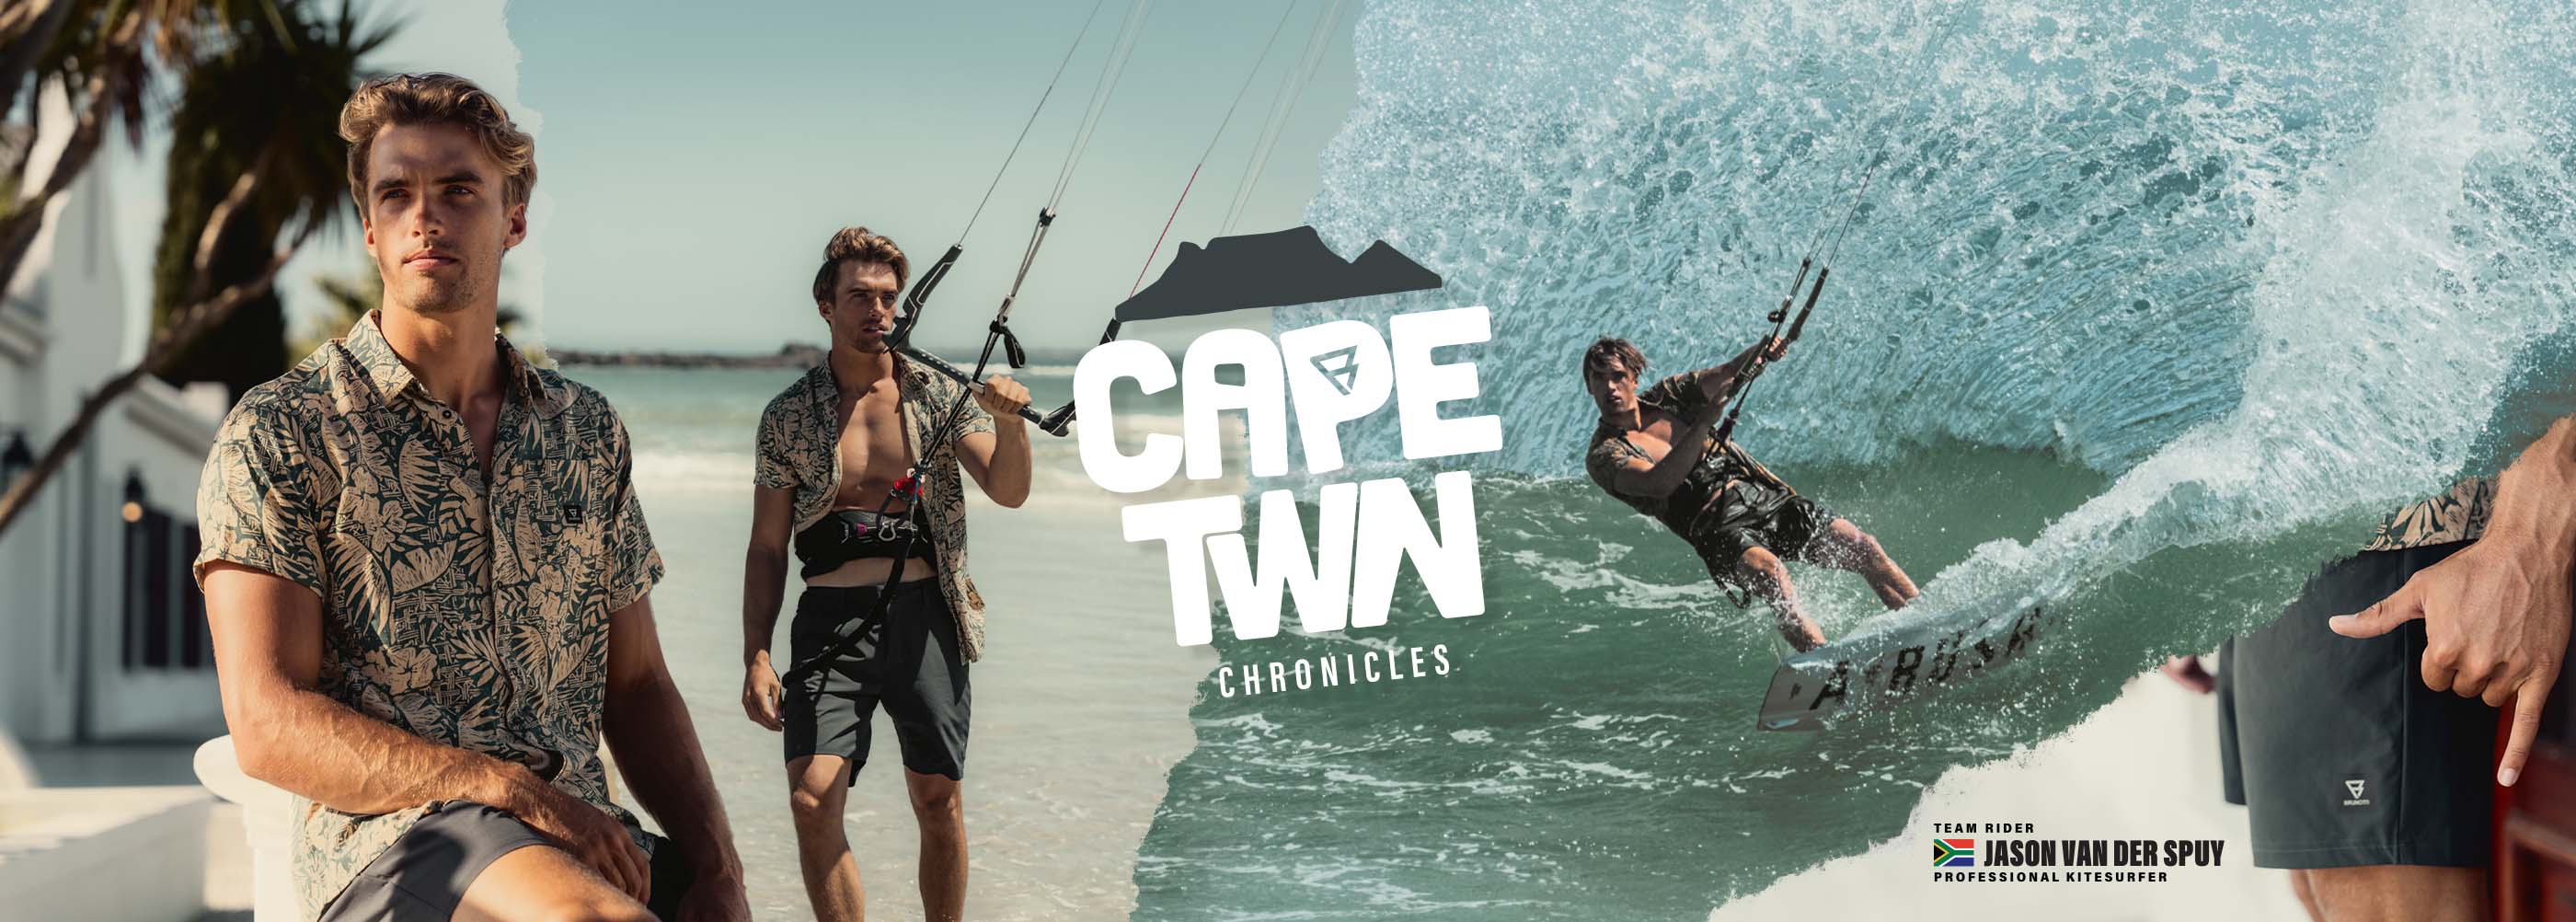 Jason Van der Spuy in the new Brunotti Men's collection riding the waves in Cape Town